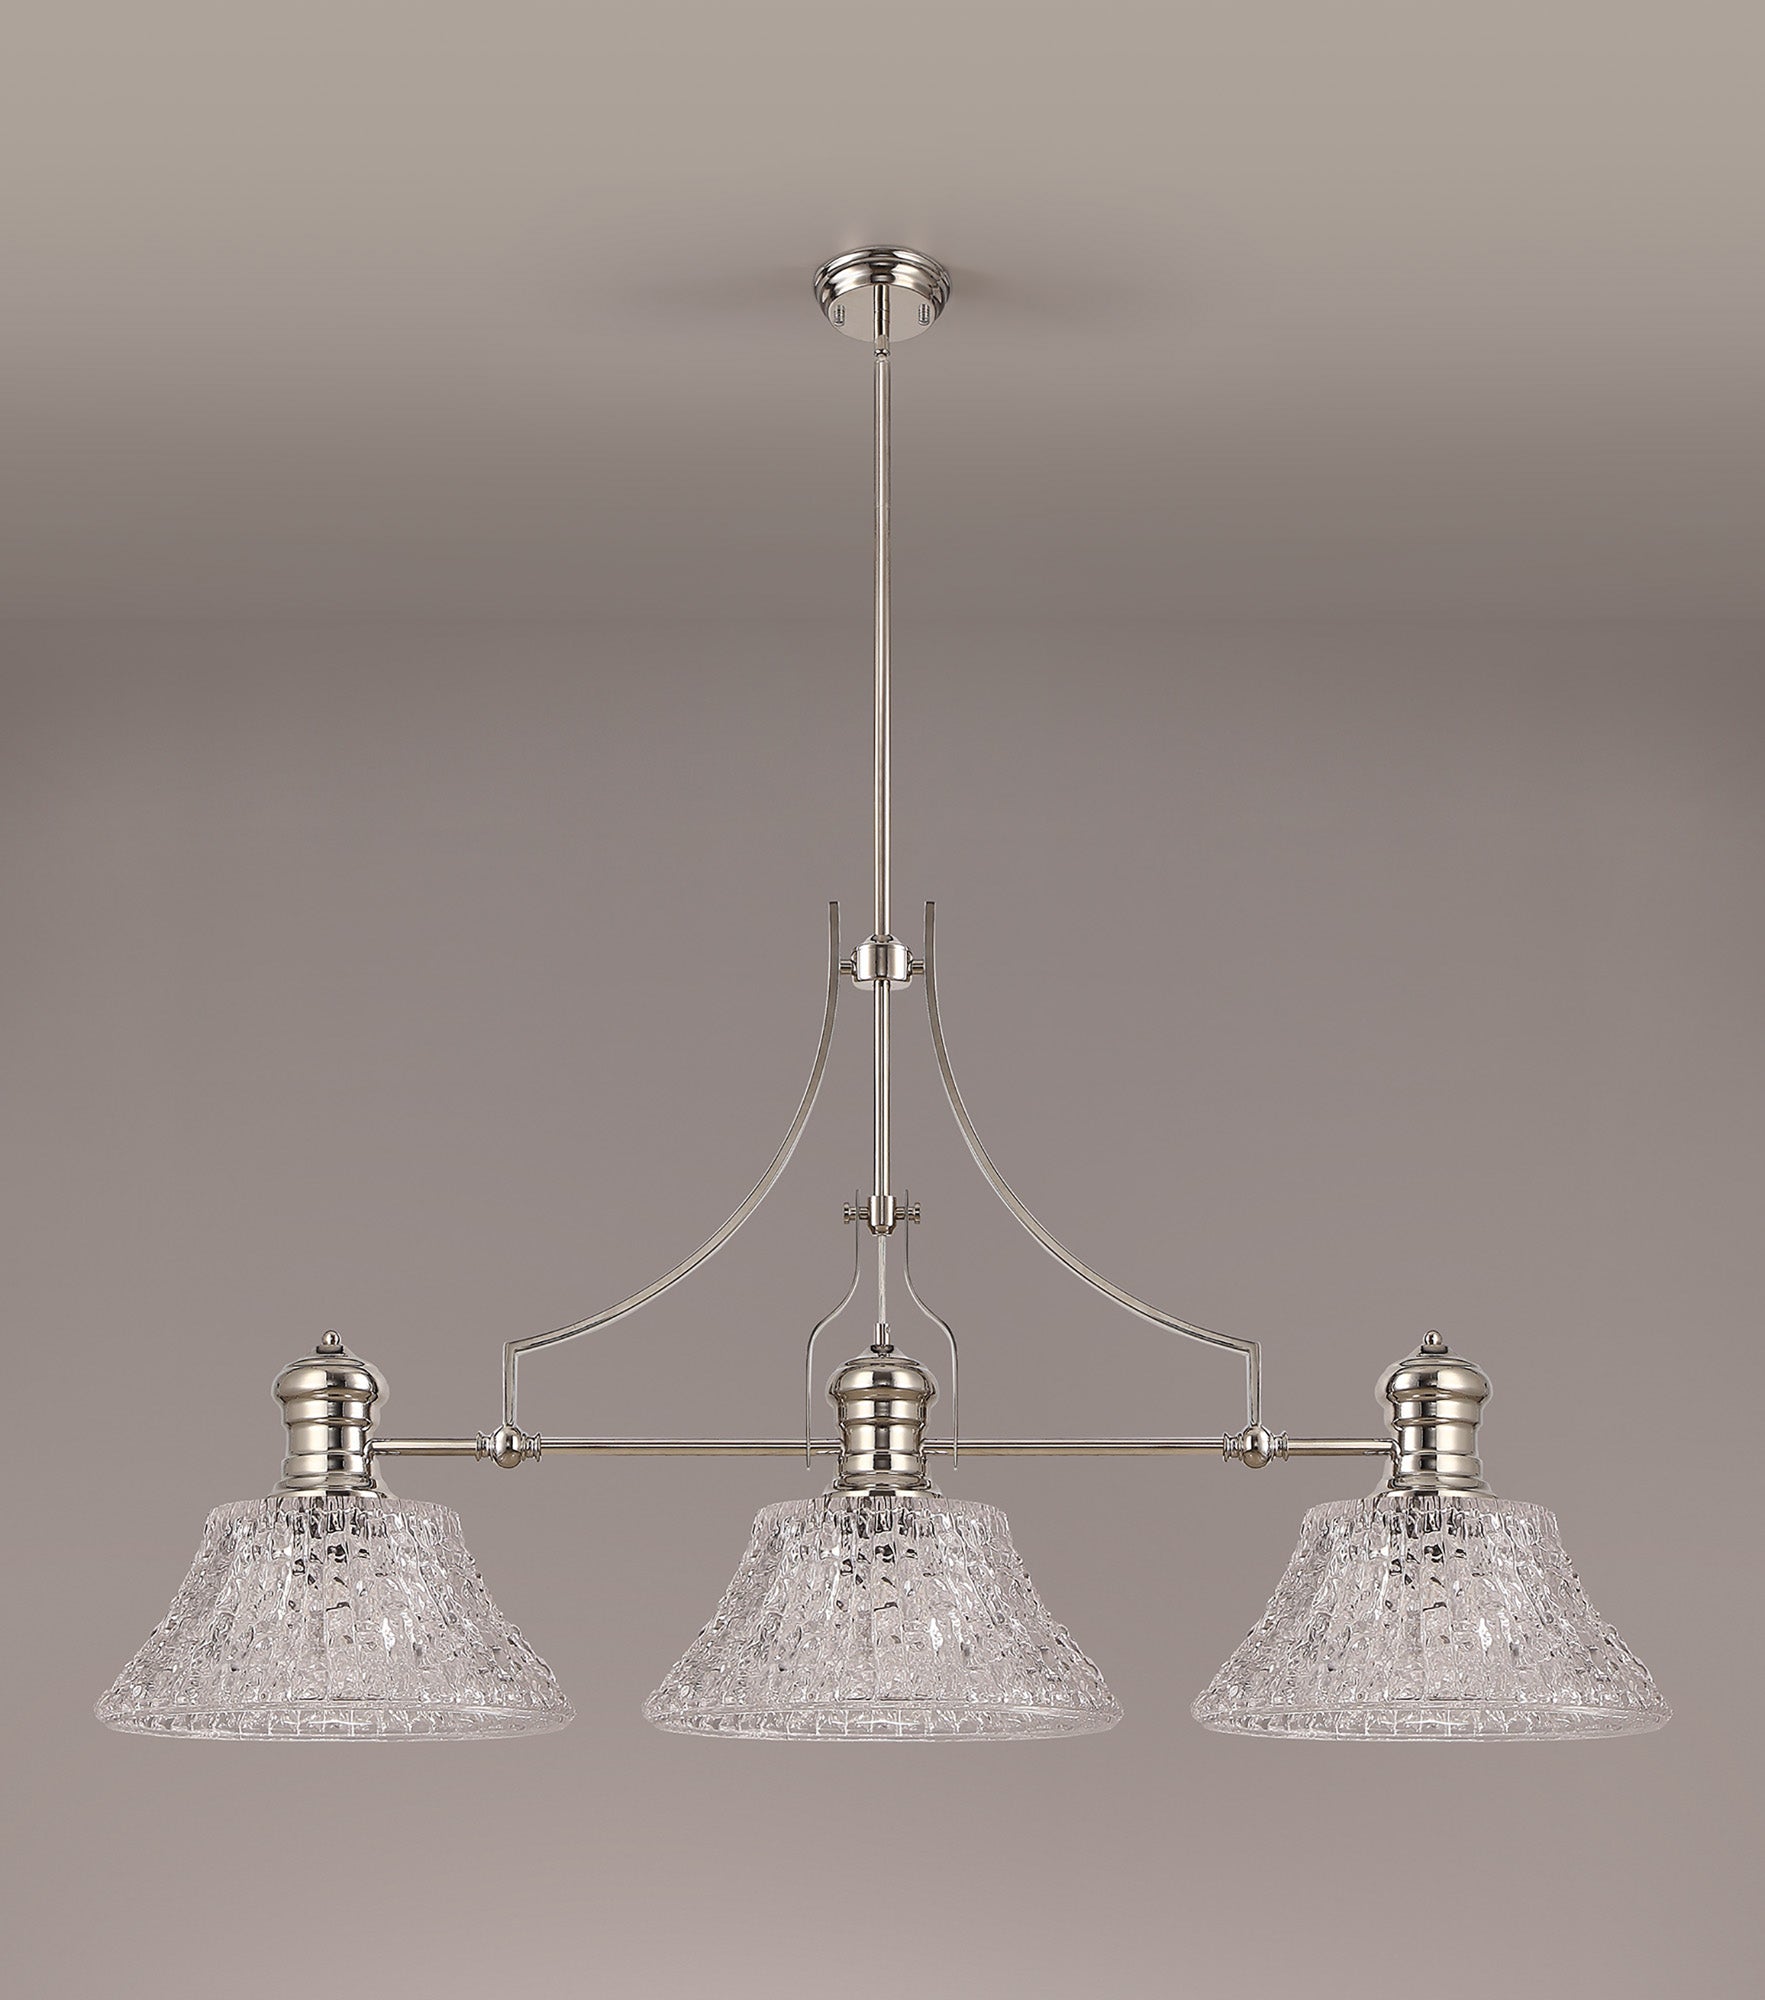 Docker Linear Pendant With 38cm Patterned Round Shade, 3 x E27, Polished Nickel/Clear Glass Item Weight: 19.1kg LOK104823